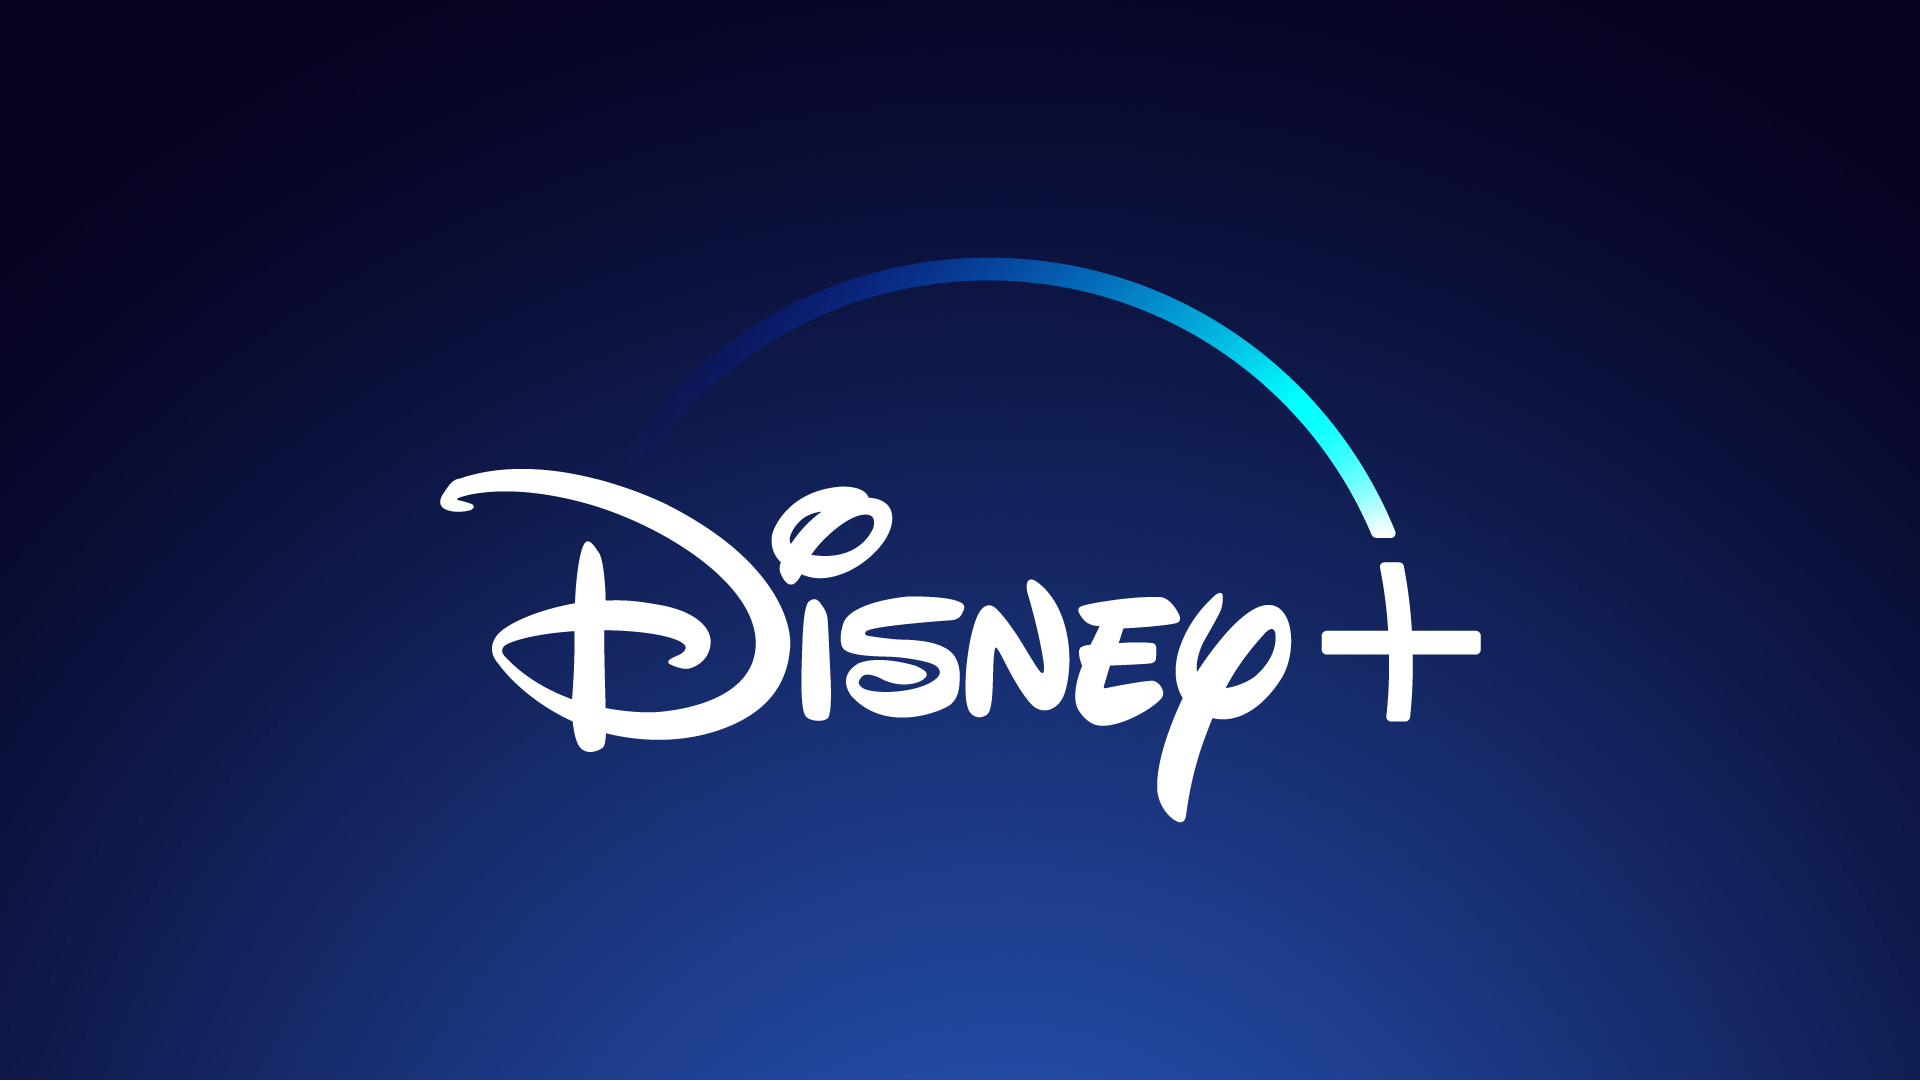 Here’s What’s Coming to Disney+ Next!